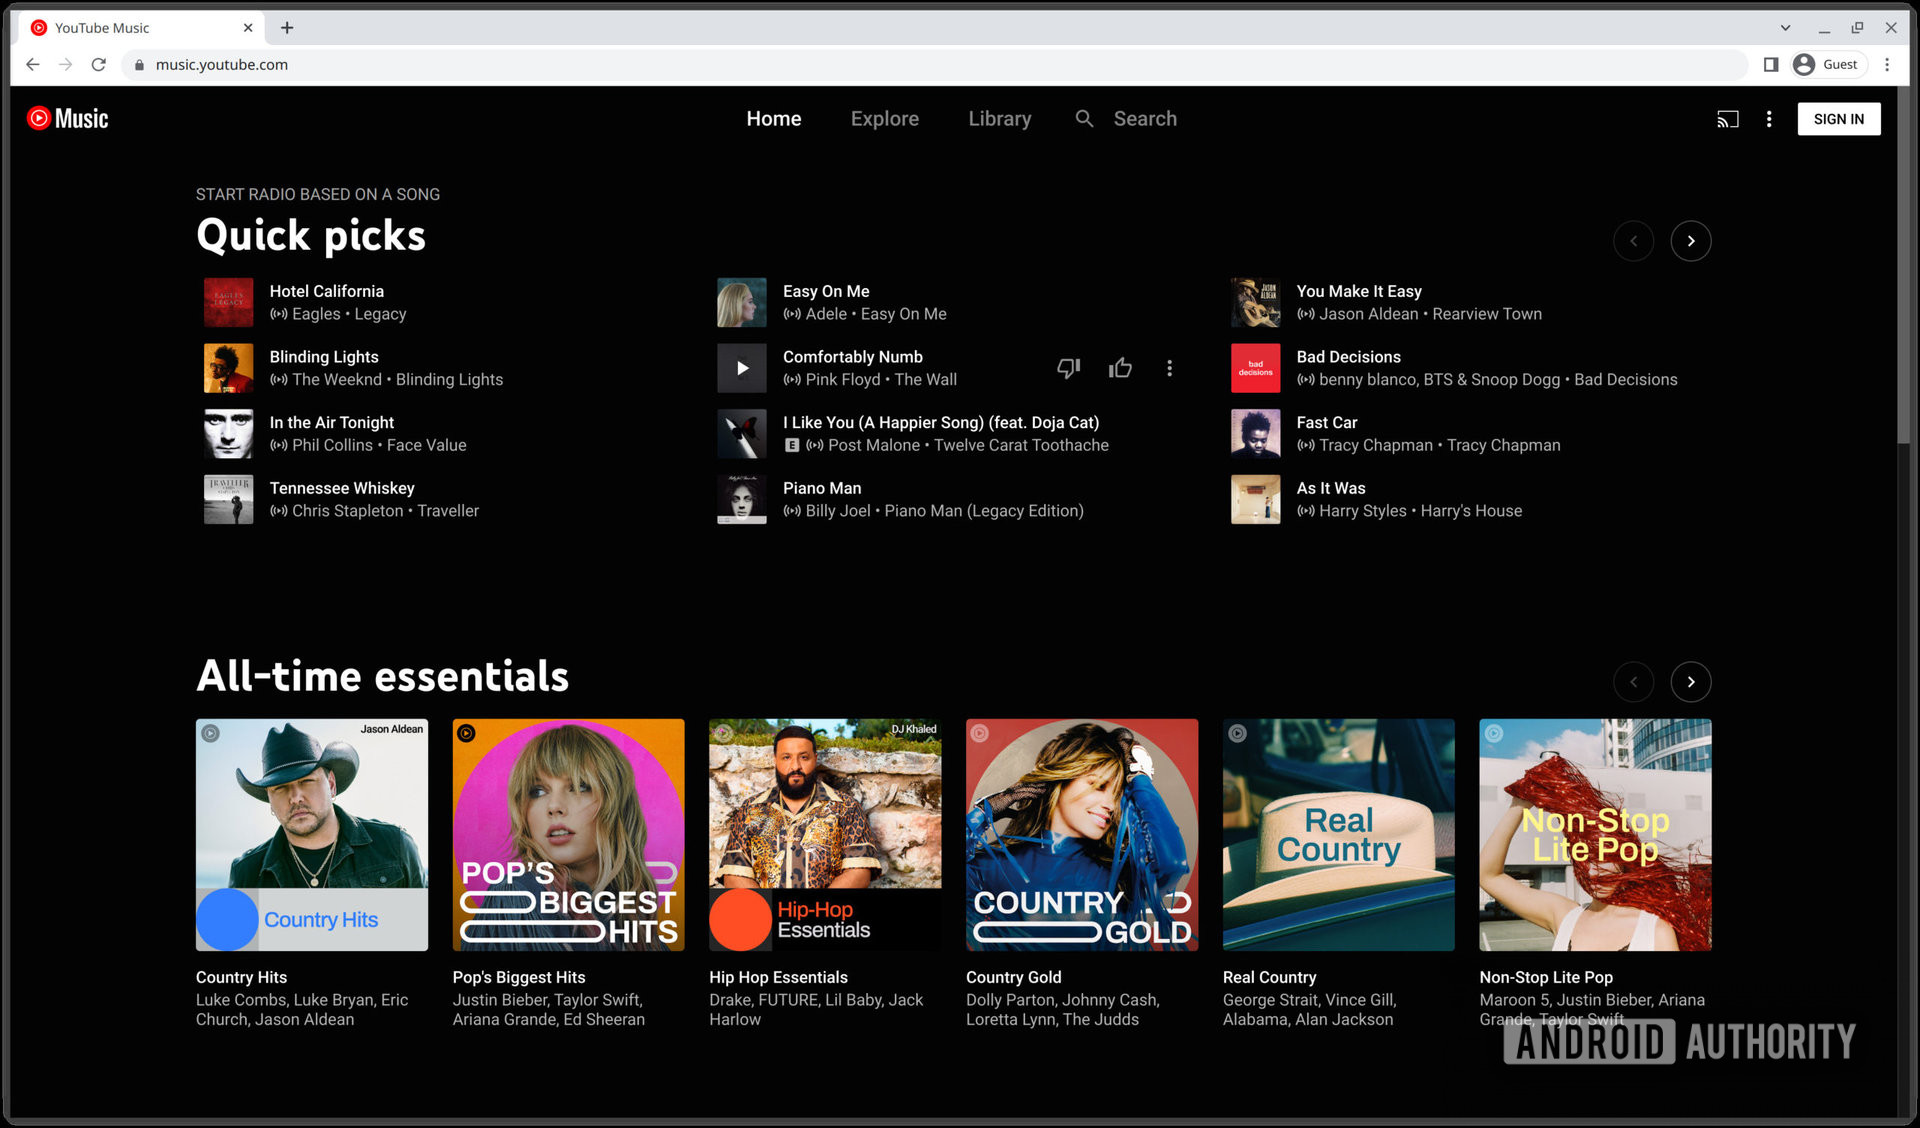 A screenshot of the YouTube Music homepage without any paid subscription. It shows varios arists, genres, artists, and playlists.